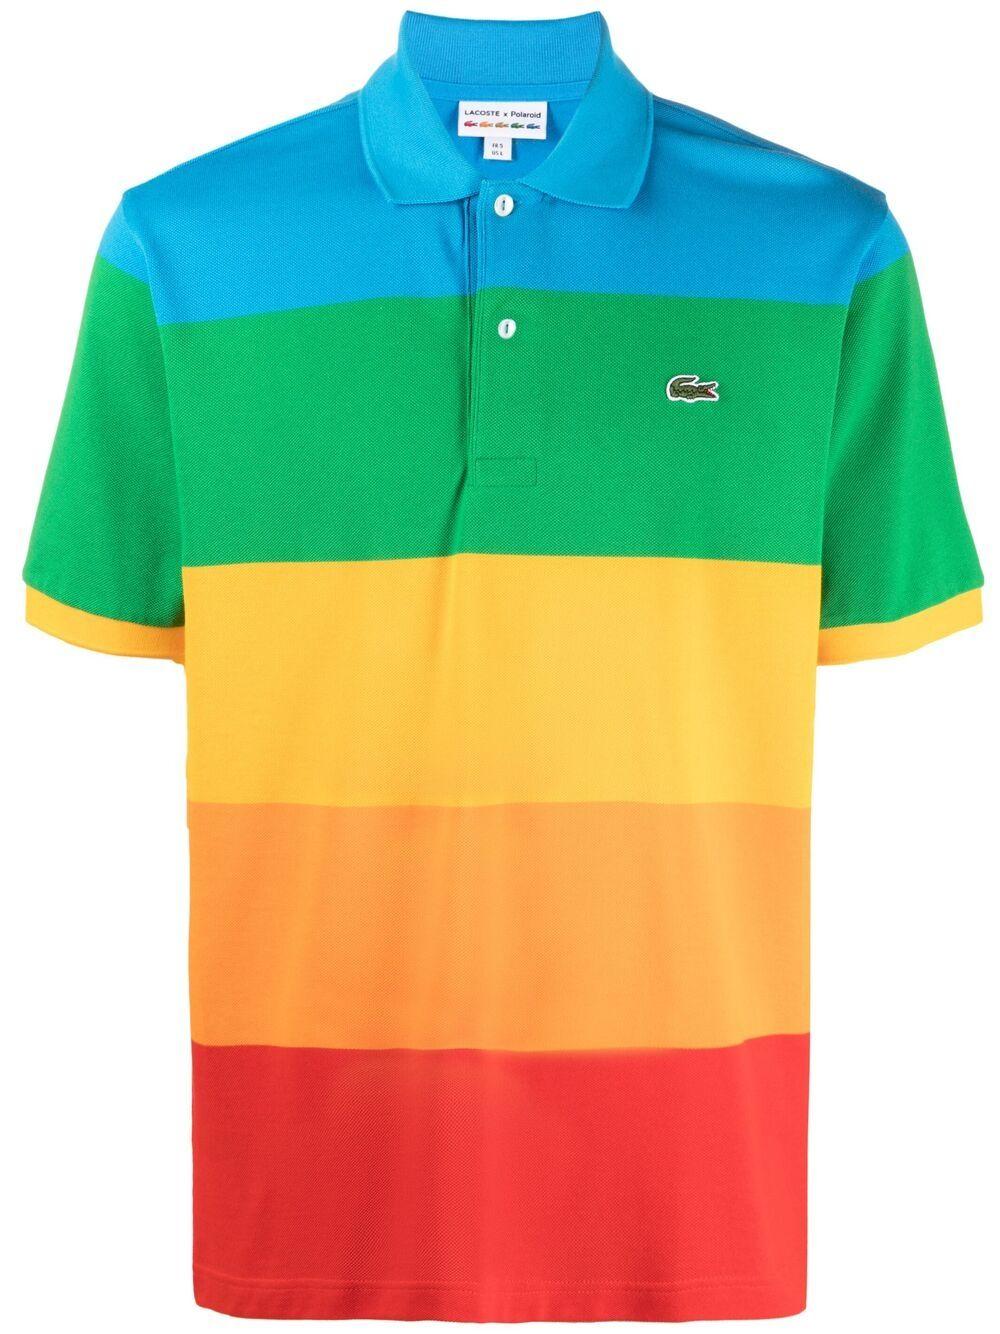 Lacoste X Polaroid Striped Polo Shirt in Blue for Men | Lyst